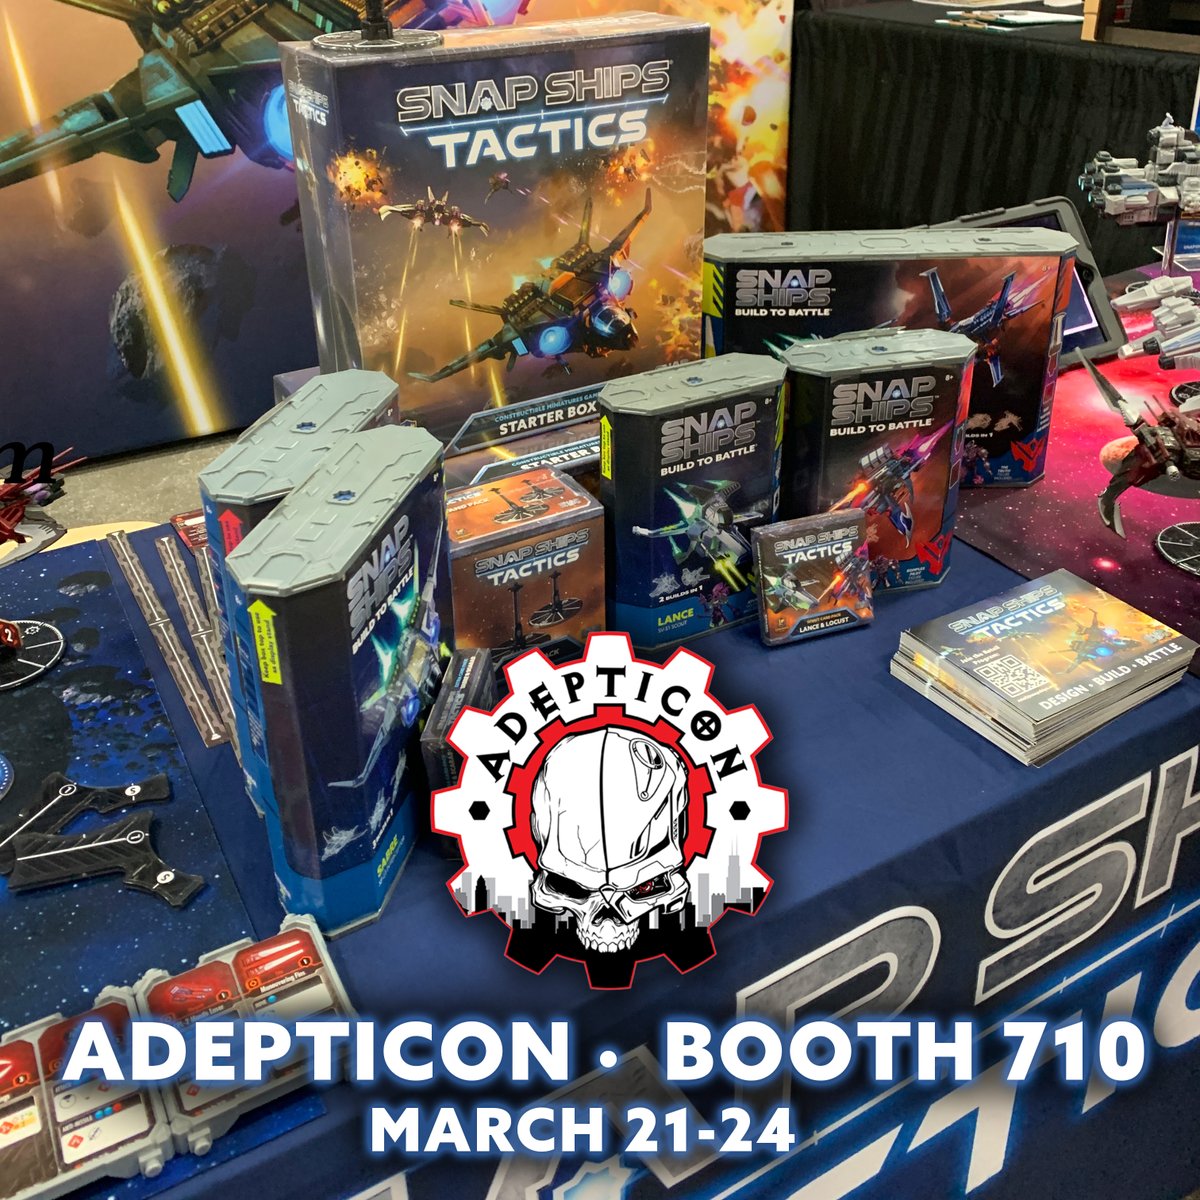 Come visit us at @AdeptiCon and grab some promo pieces! Special deals for convention attendees. 👀